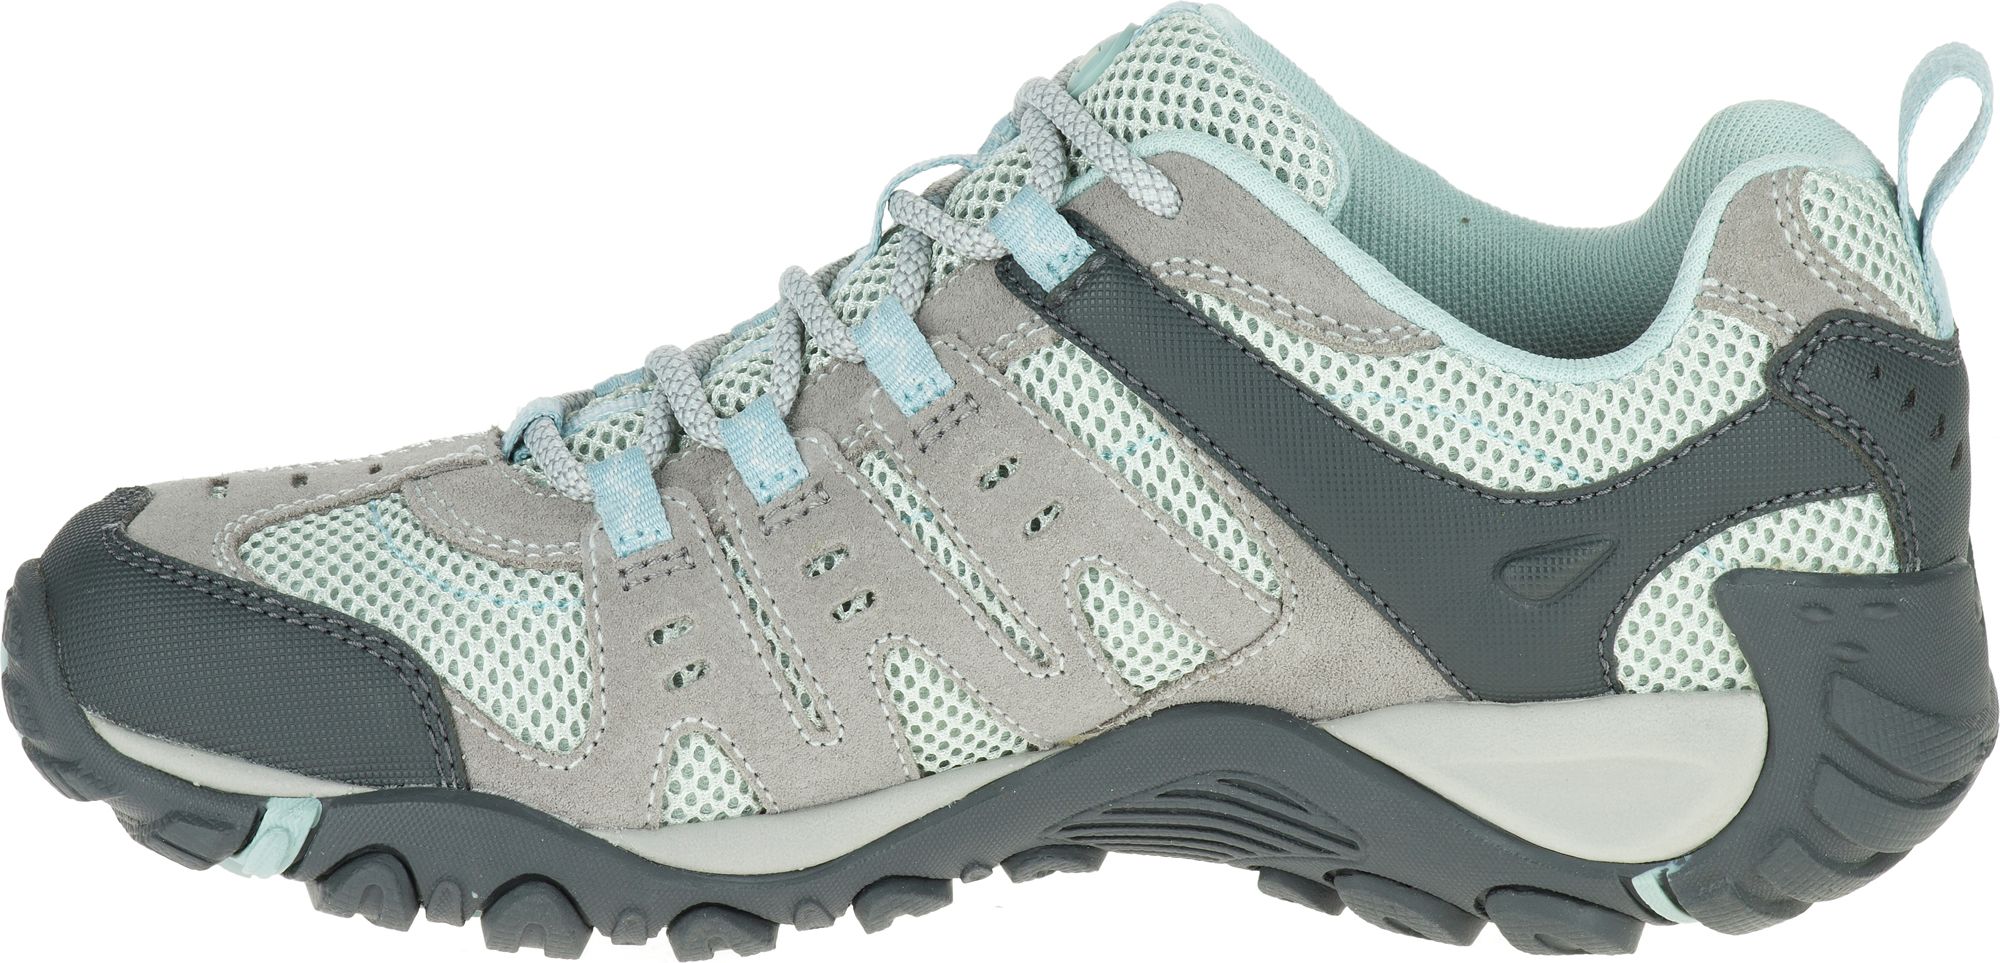 merrell accentor low hiking shoes